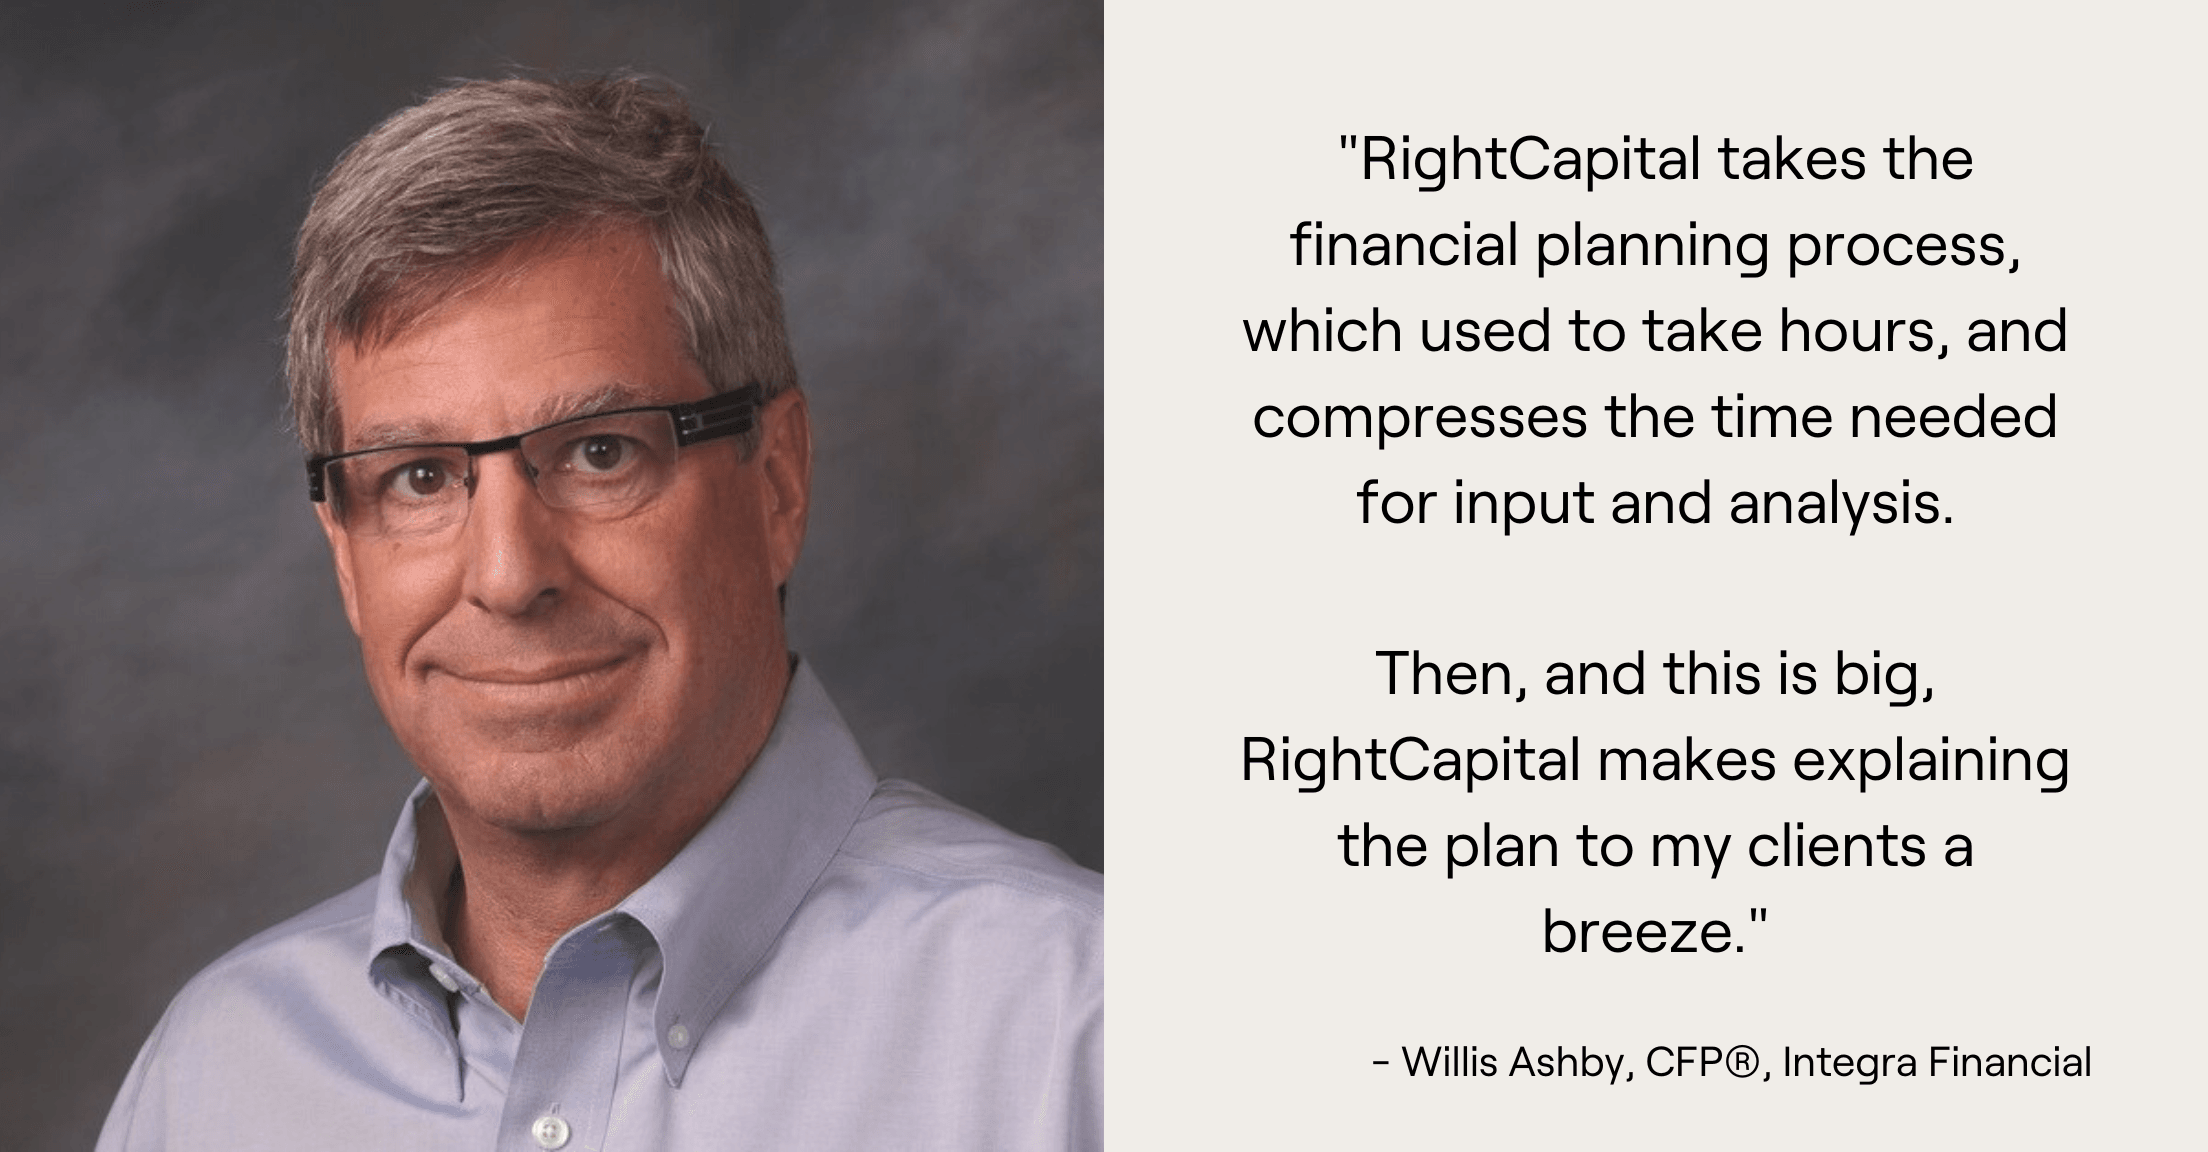 Headshot of Willis Ashby and quote, "RightCapital takes the financial planning process, which used to take hours, and compresses the time needed for input and analysis.  Then, and this is big, RightCapital makes explaining the plan to my clients a breeze."